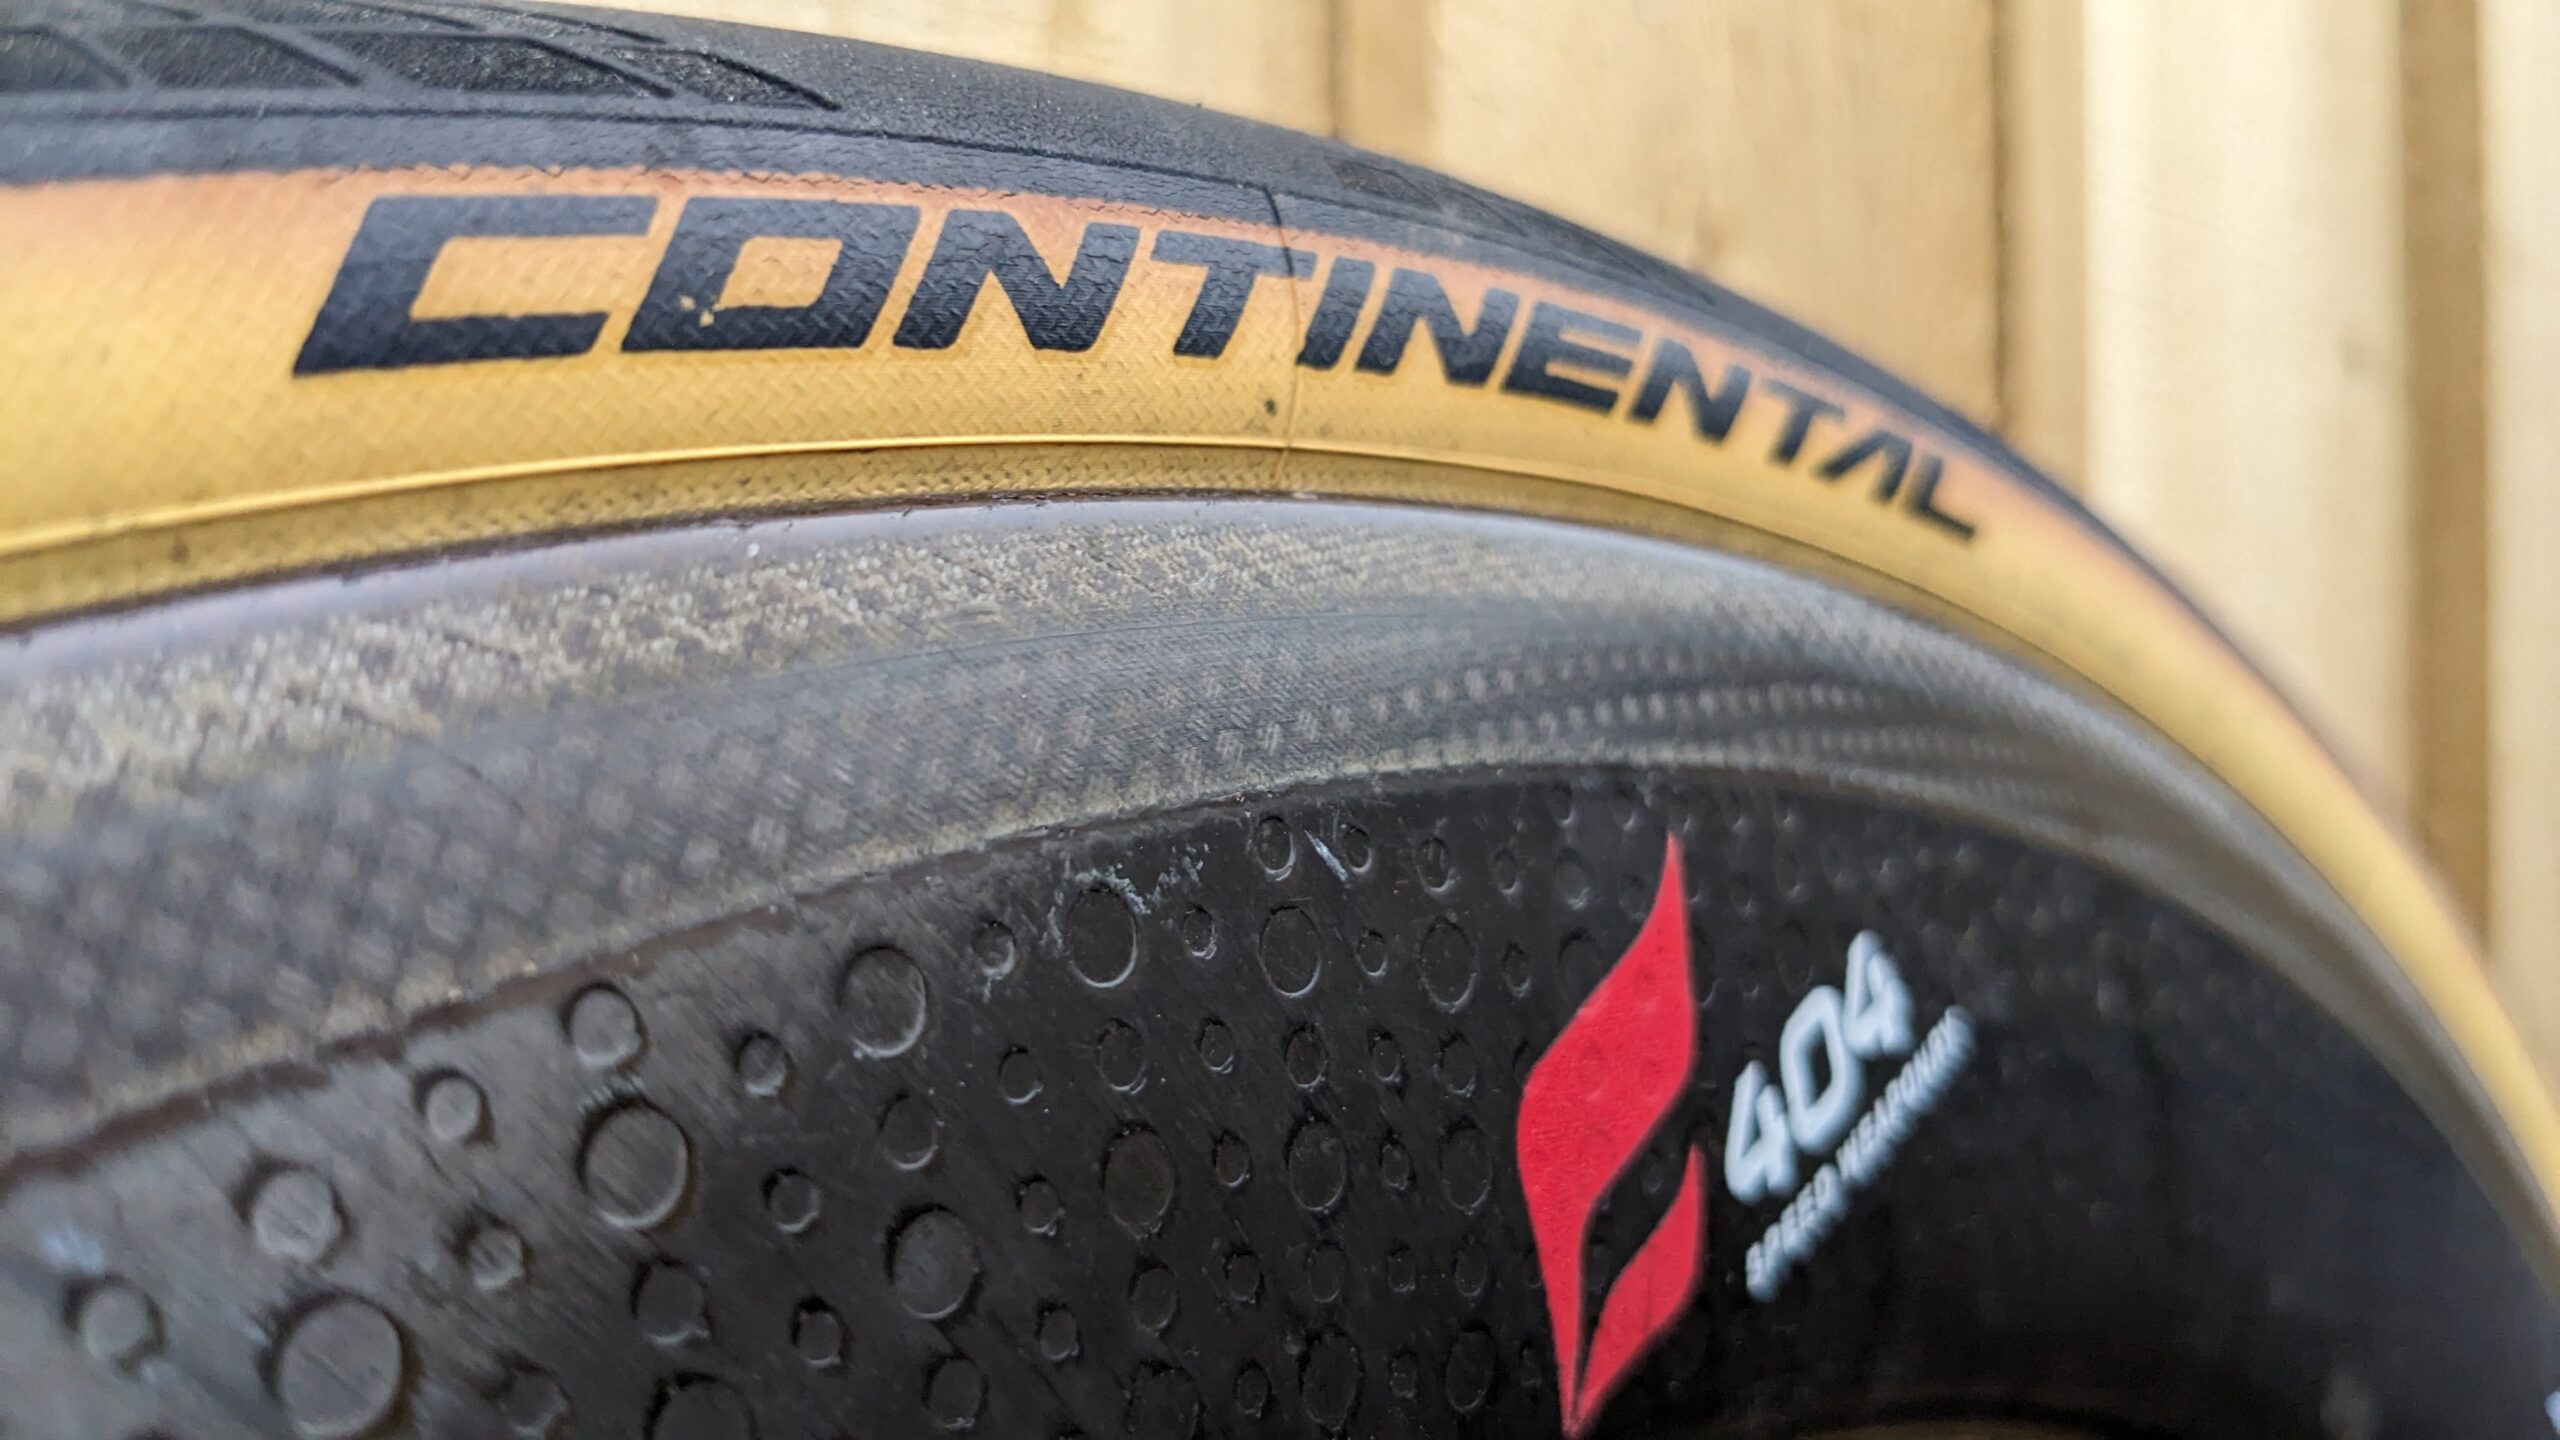 Continental Road tyre